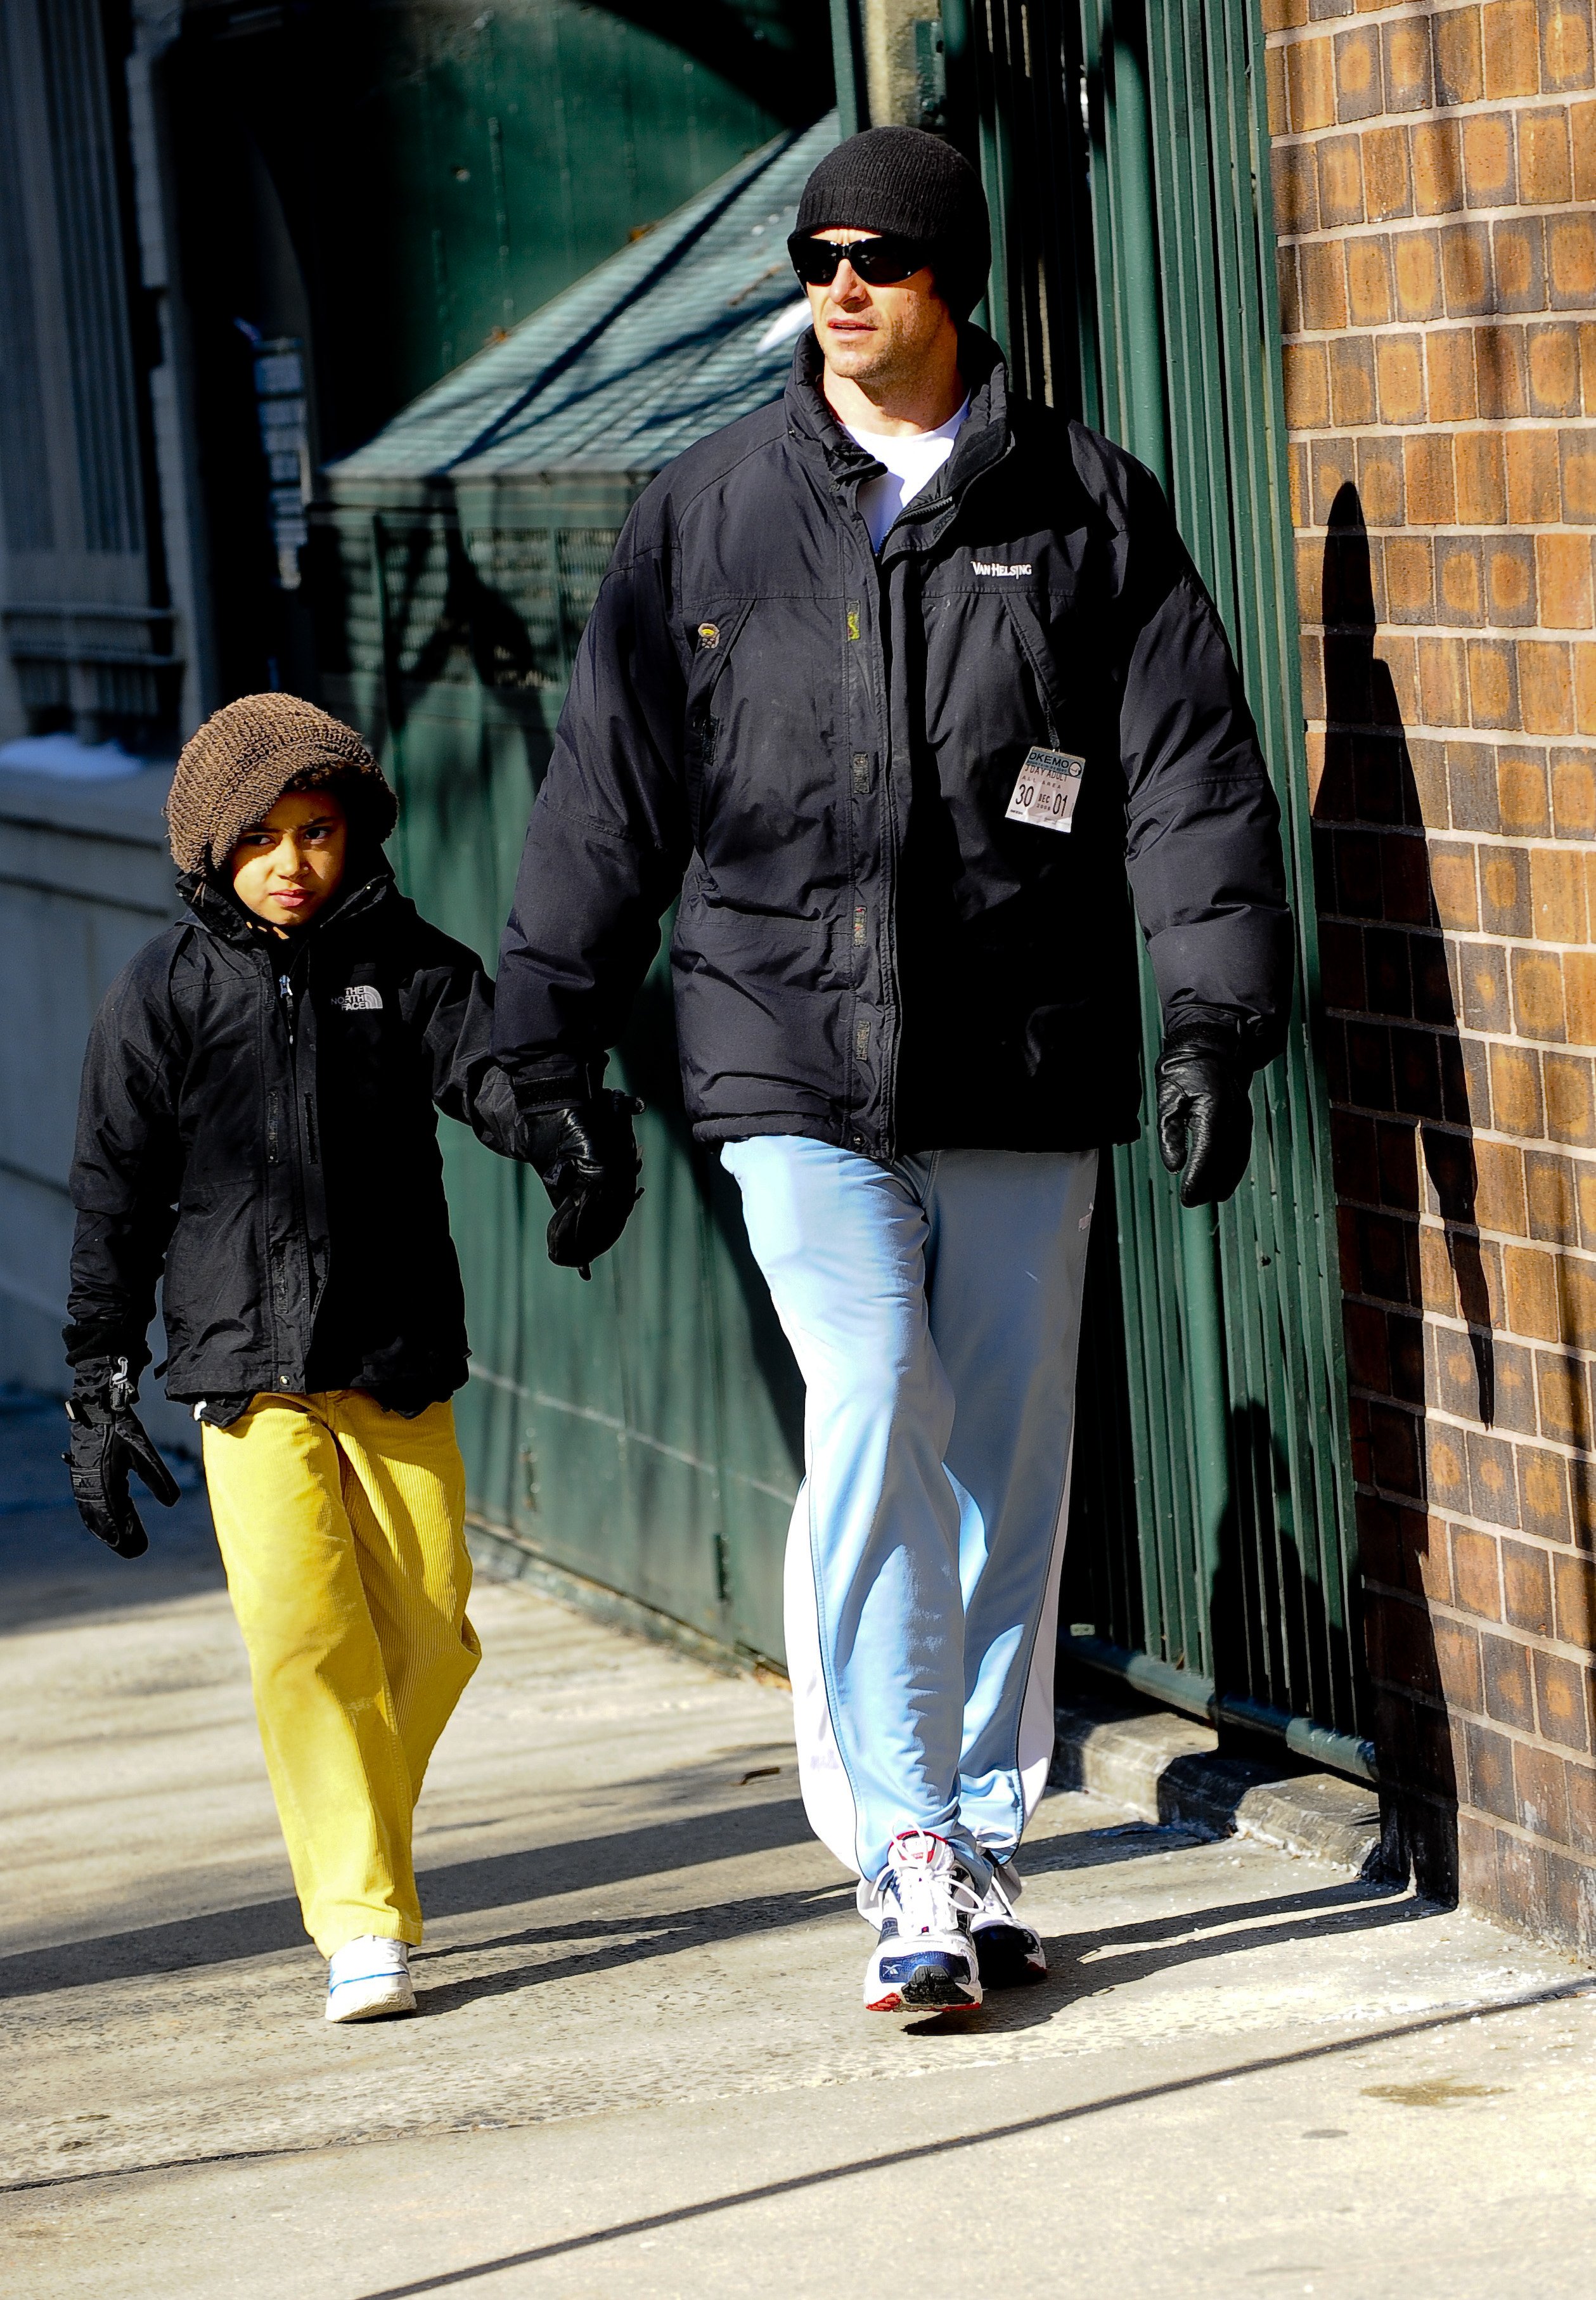 Hugh Jackman and Oscar Jackman in Manhattan on March 5, 2009 | Source: Getty Images 